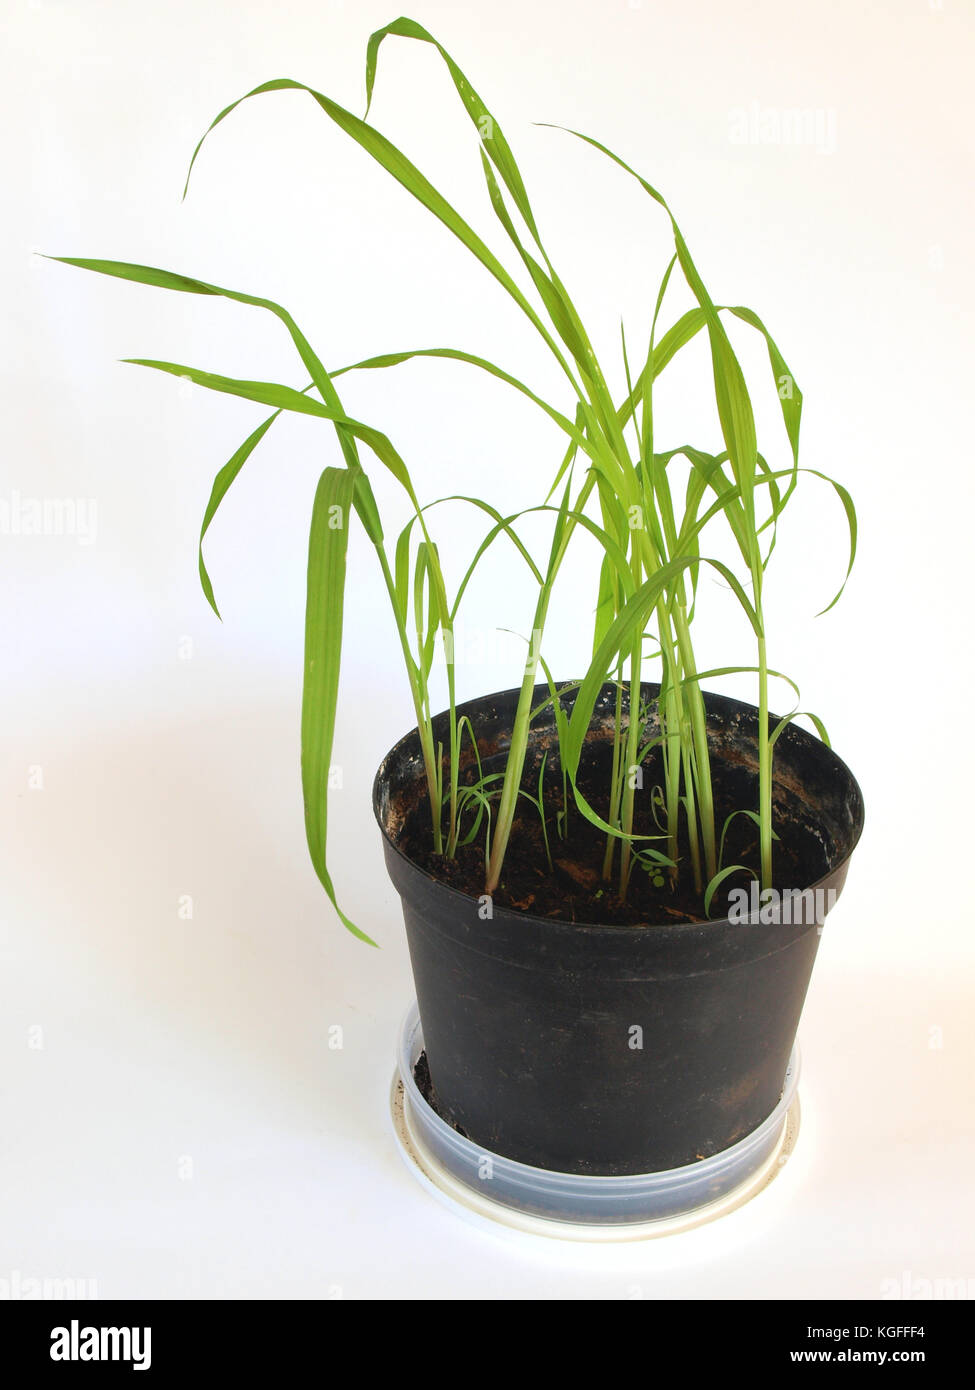 Giant moso bamboo seedlings are growing indoor in flower pot on white background Stock Photo